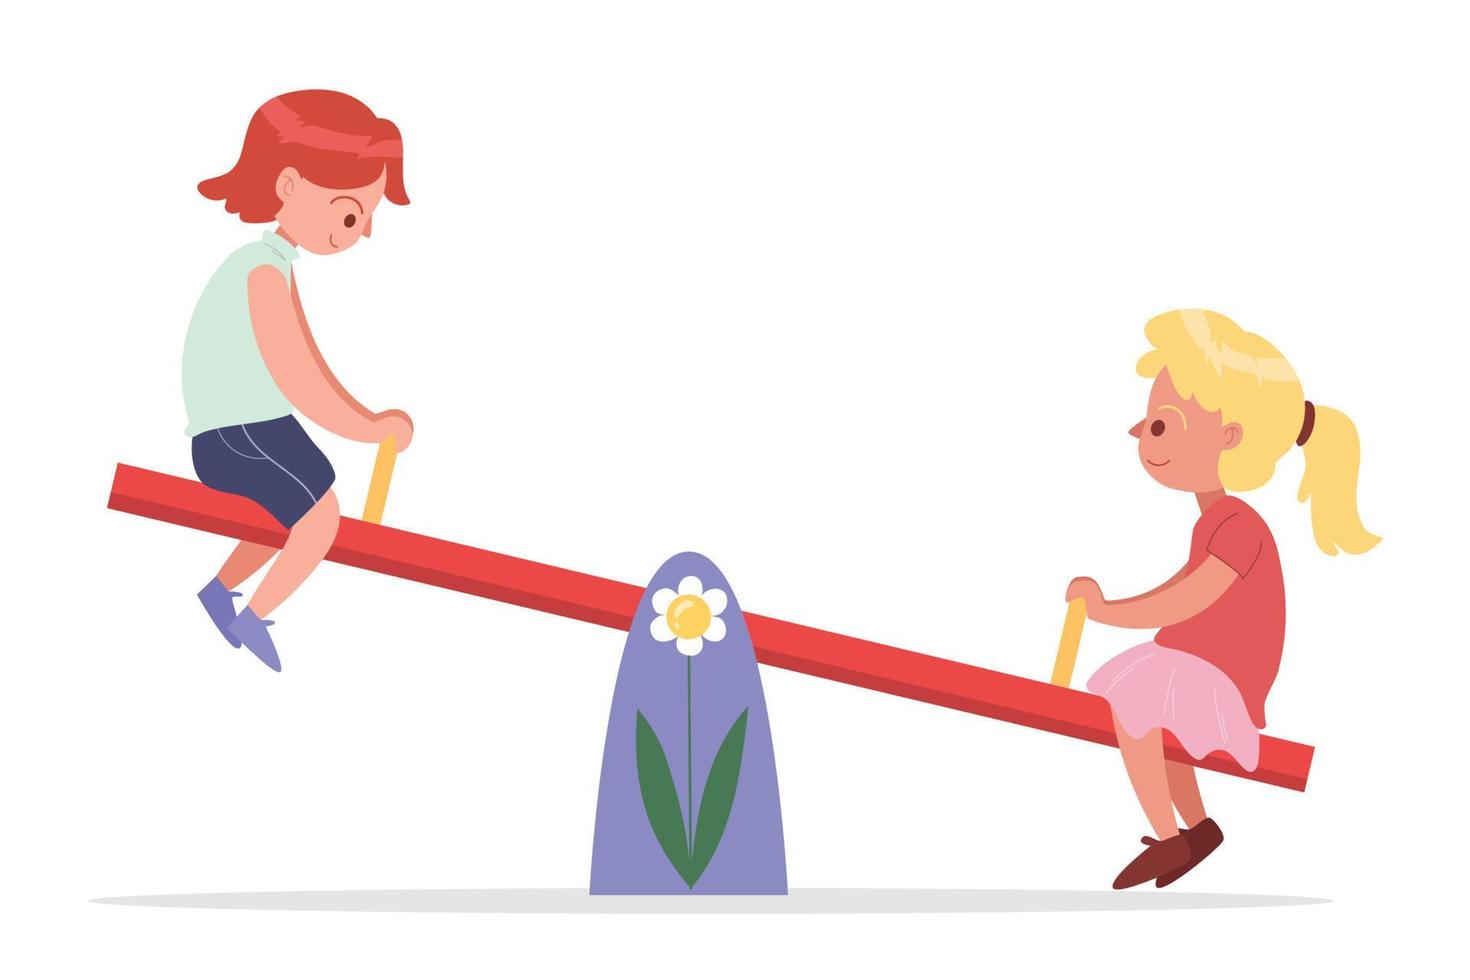 Kids playing on a seesaw cartoon vector